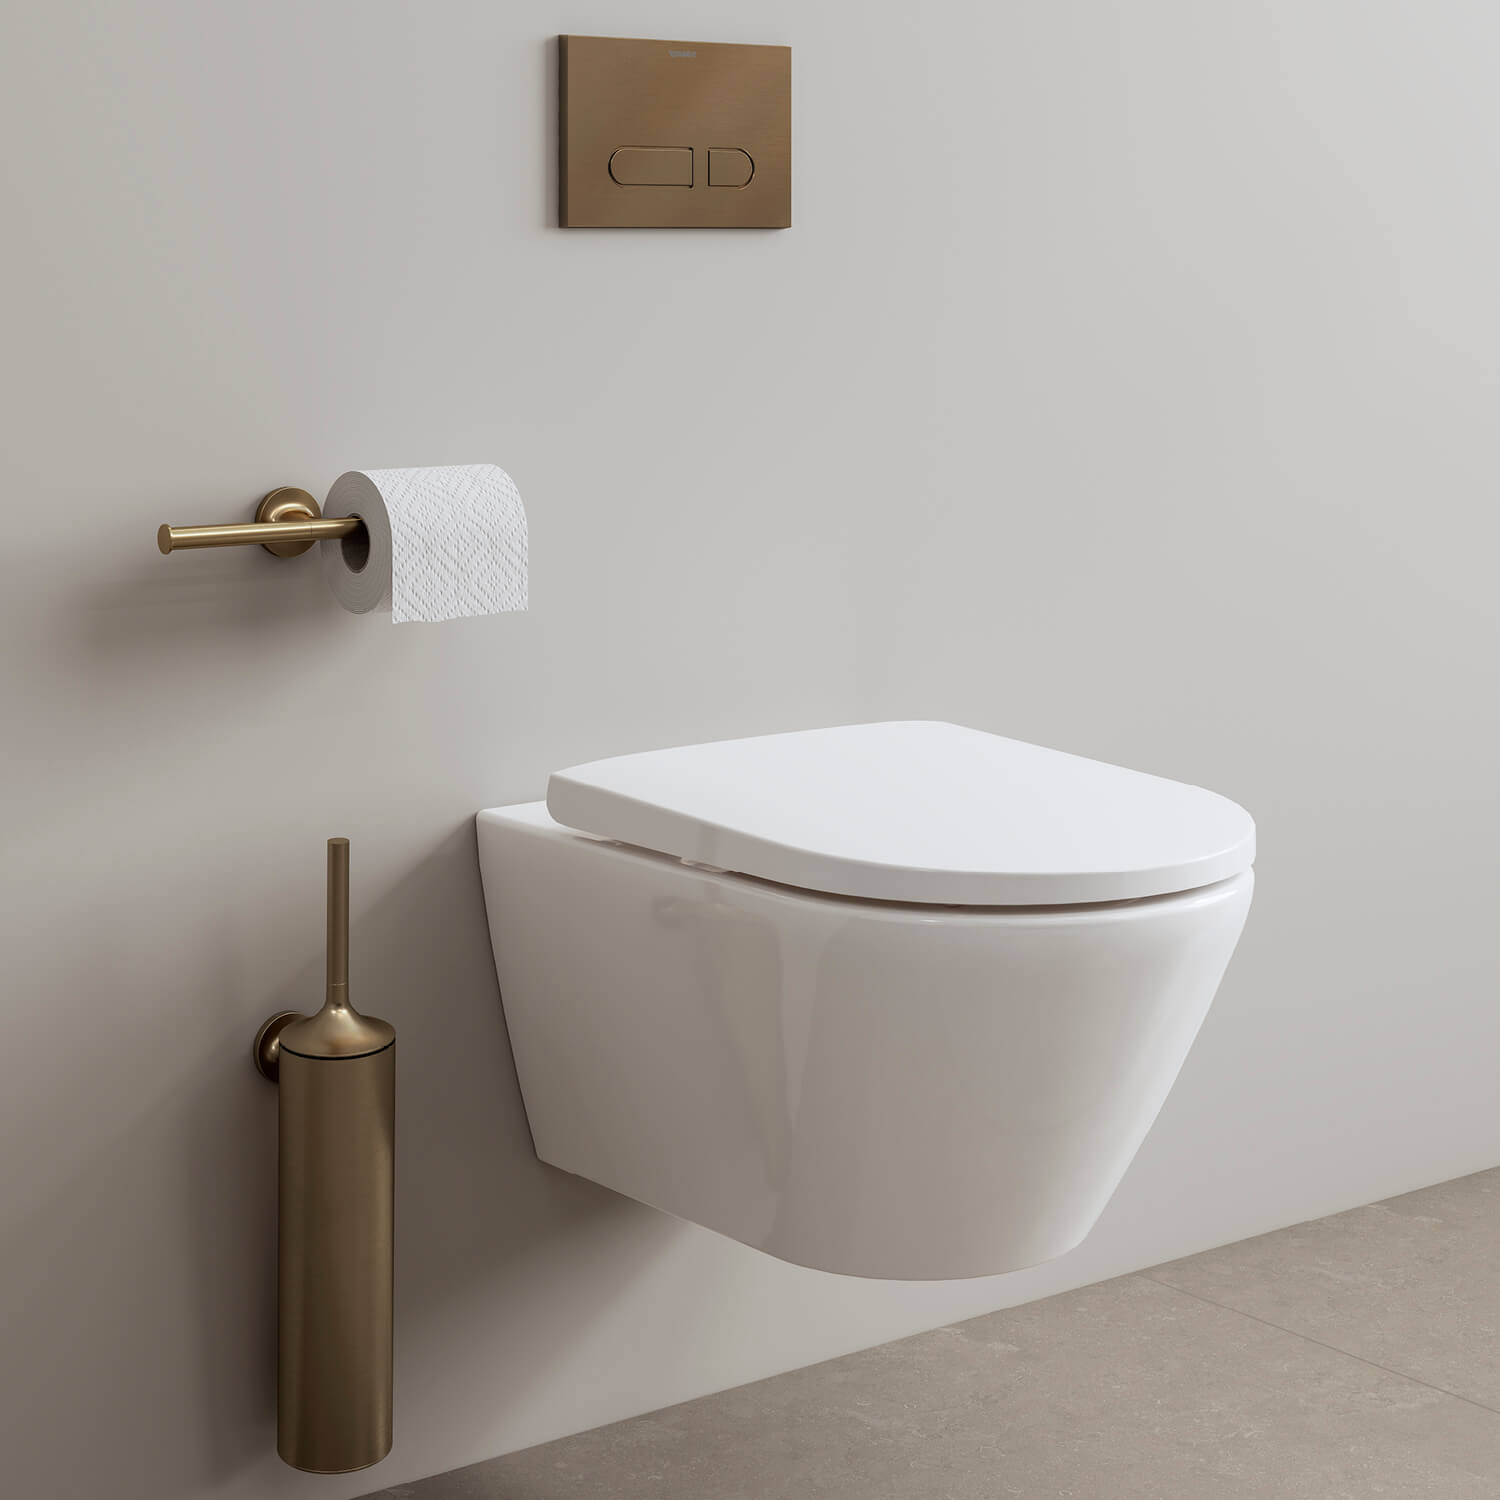 Toilet accessoires in bronze brushed
